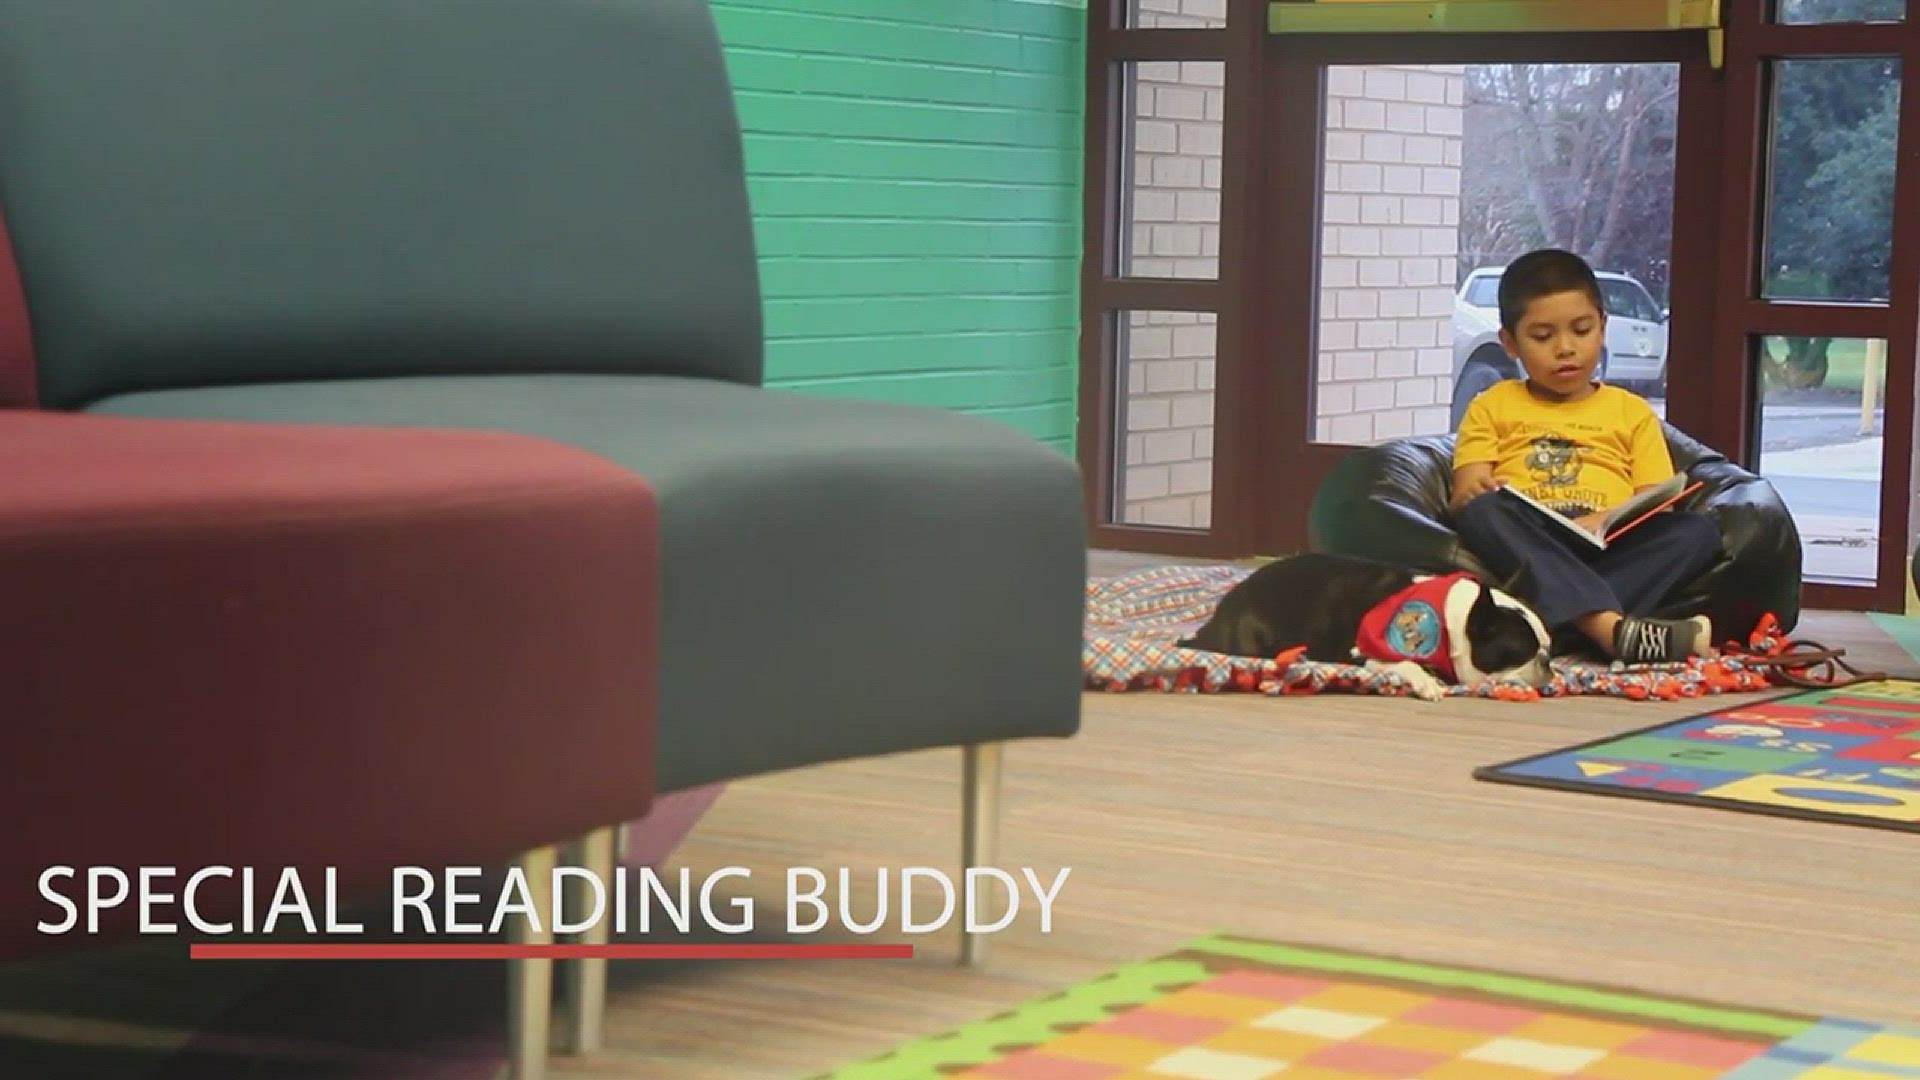 A program is partnering children who are self conscious reading aloud with a patient & non-judgmental reading buddy, a dog.